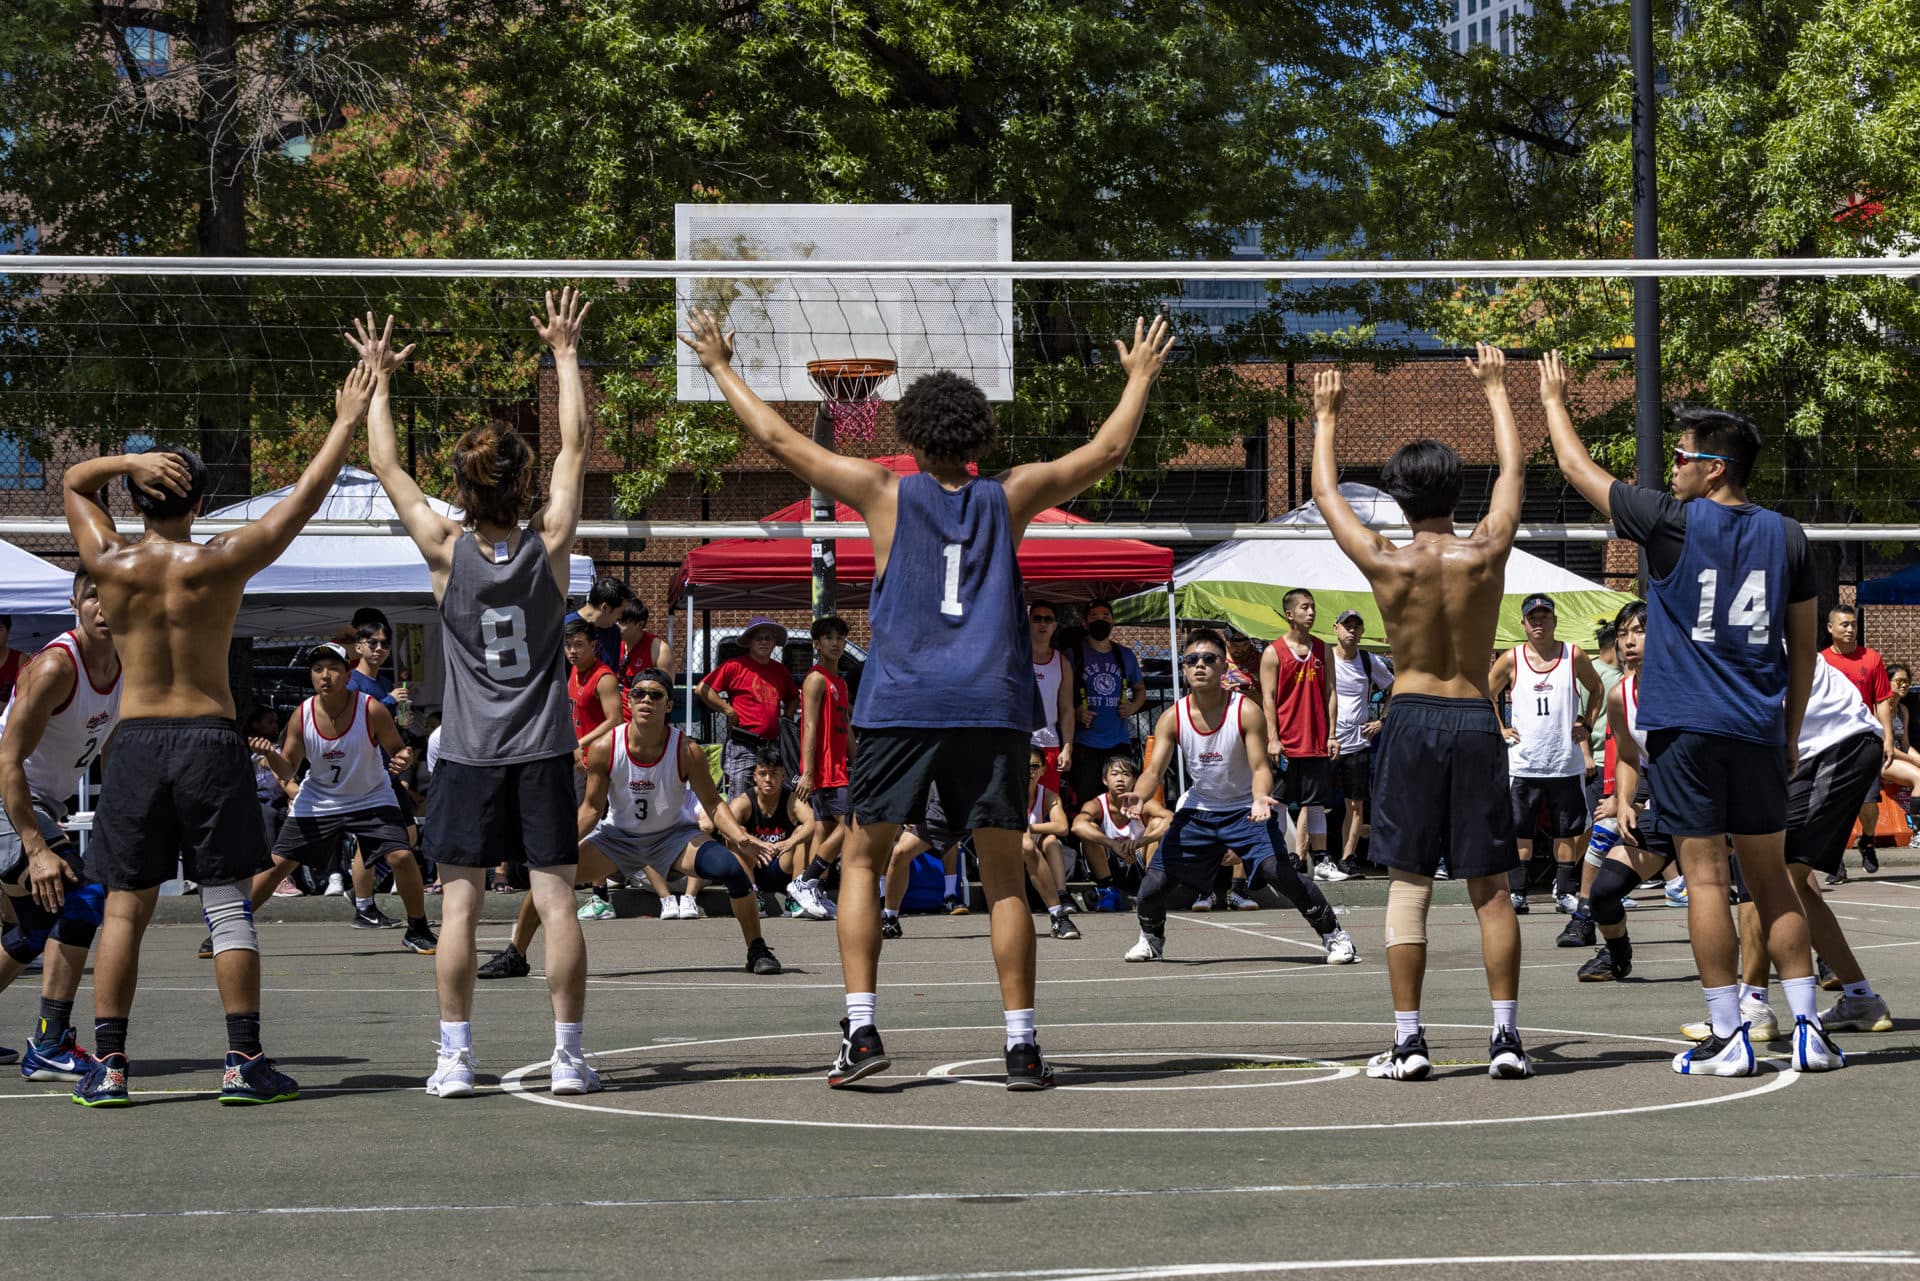 The Boston Freemasons face off against the Rising Tide during the Reggie Wong Memorial Volleyball Tournament at Reggie Wong Park in August 2022. (Jesse Costa/WBUR)